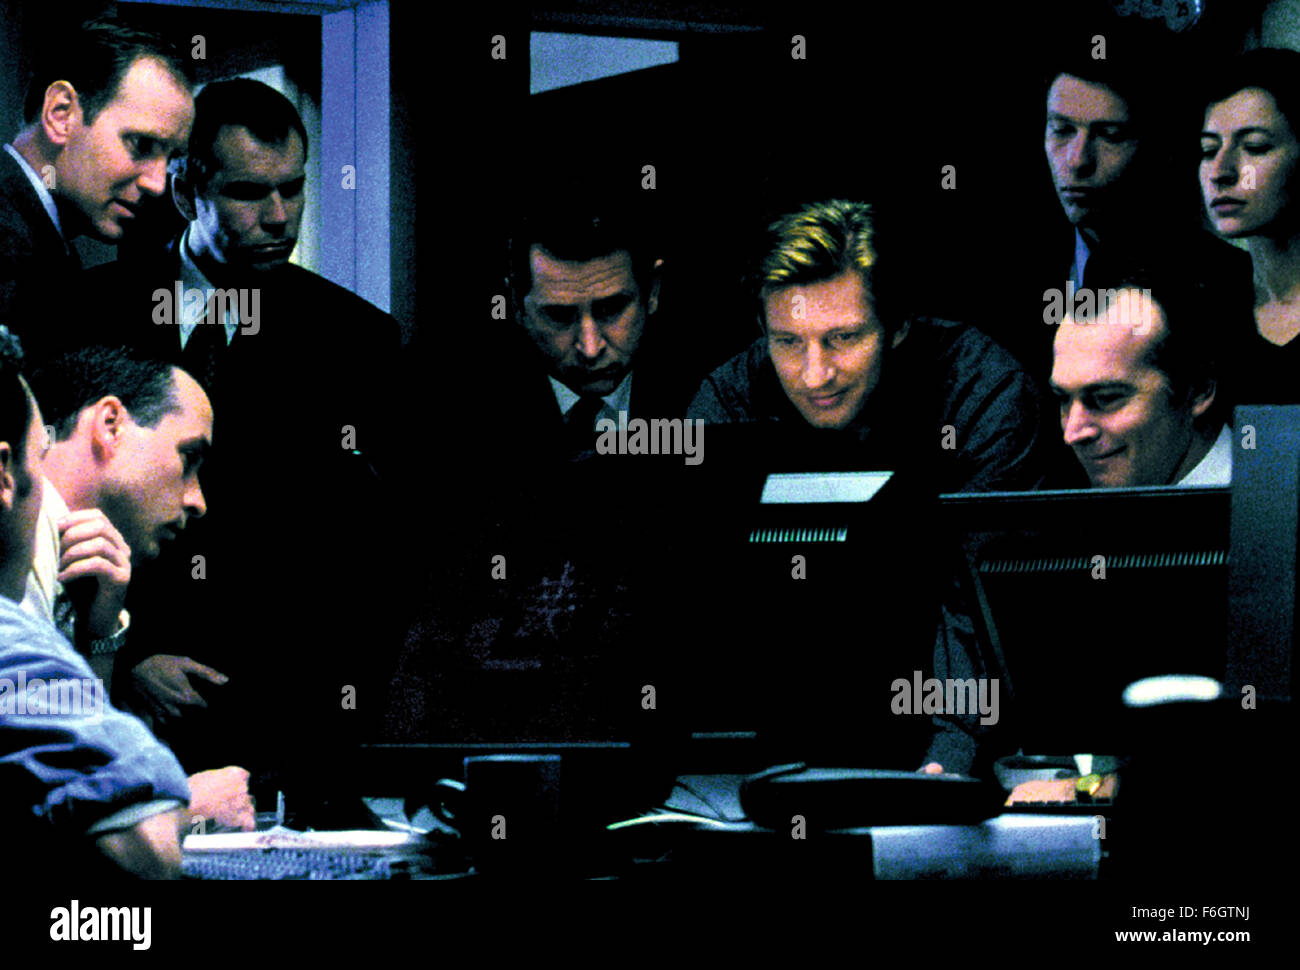 Jul 18, 2001; Melbourne, VIC, AUSTRALIA; ANTHONY LAPAGLIA and DAVID WENHAM star as Simon O'Reilly and Jim Doyle in the drama 'The Bank' directed by Robert Connolly. Stock Photo